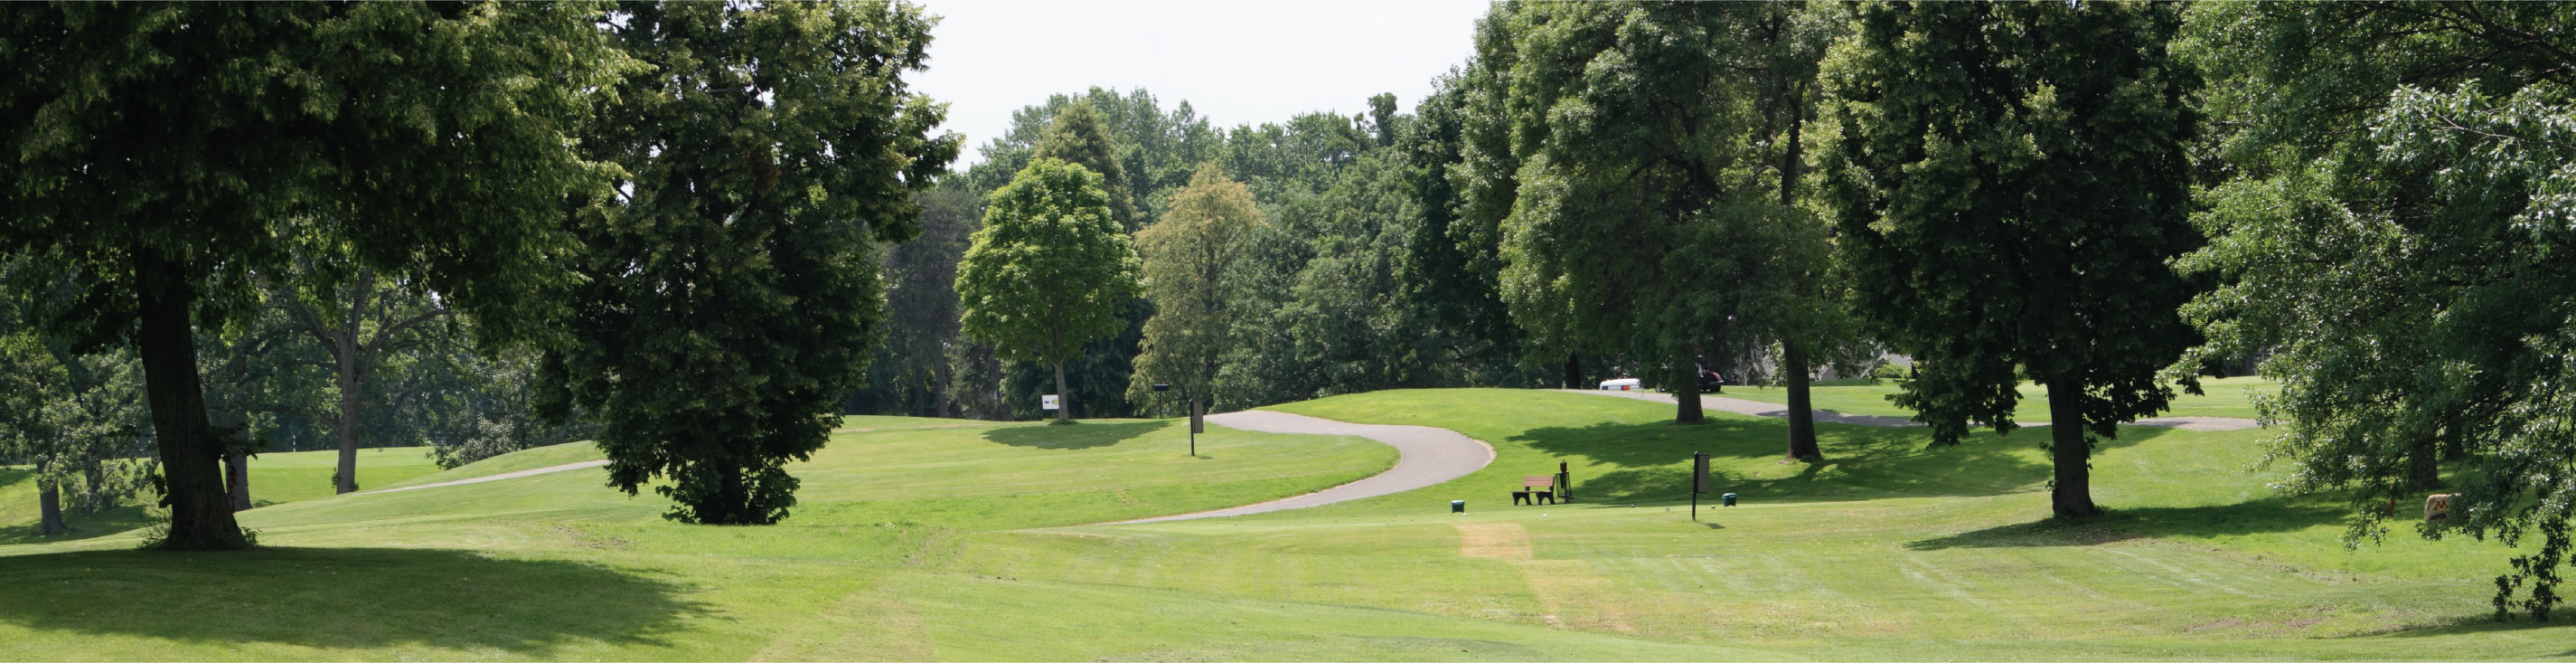 green gold course with trees on side and sidewalk curving down the middle